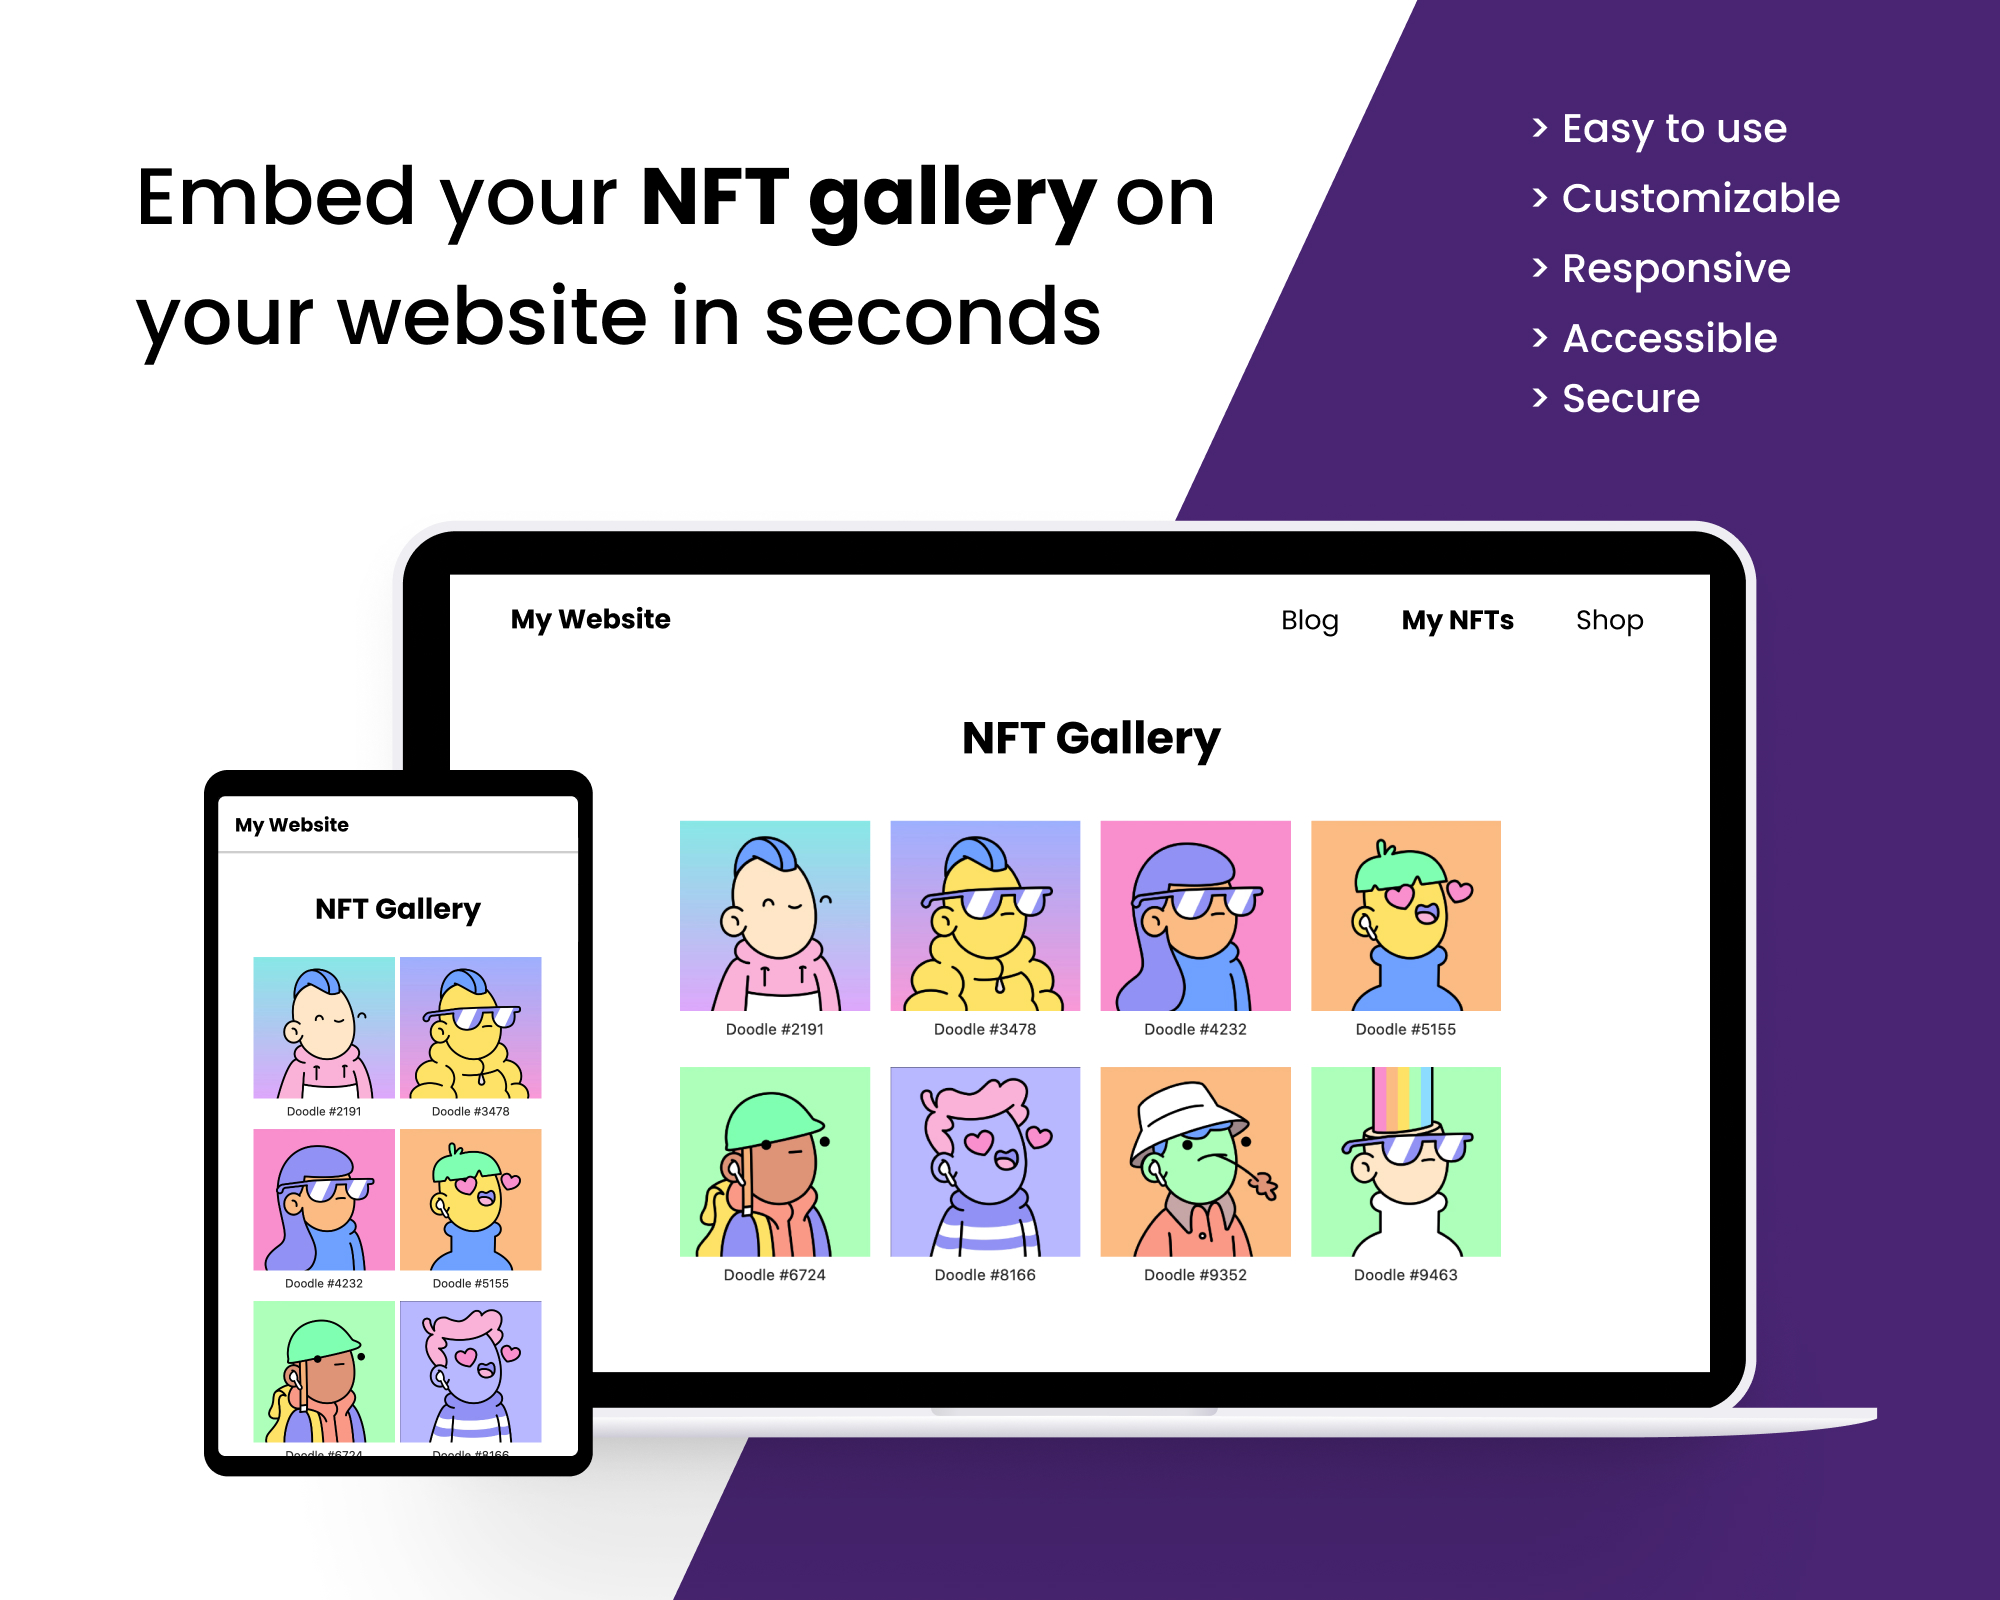 Embed your NFT gallery on your website in seconds.